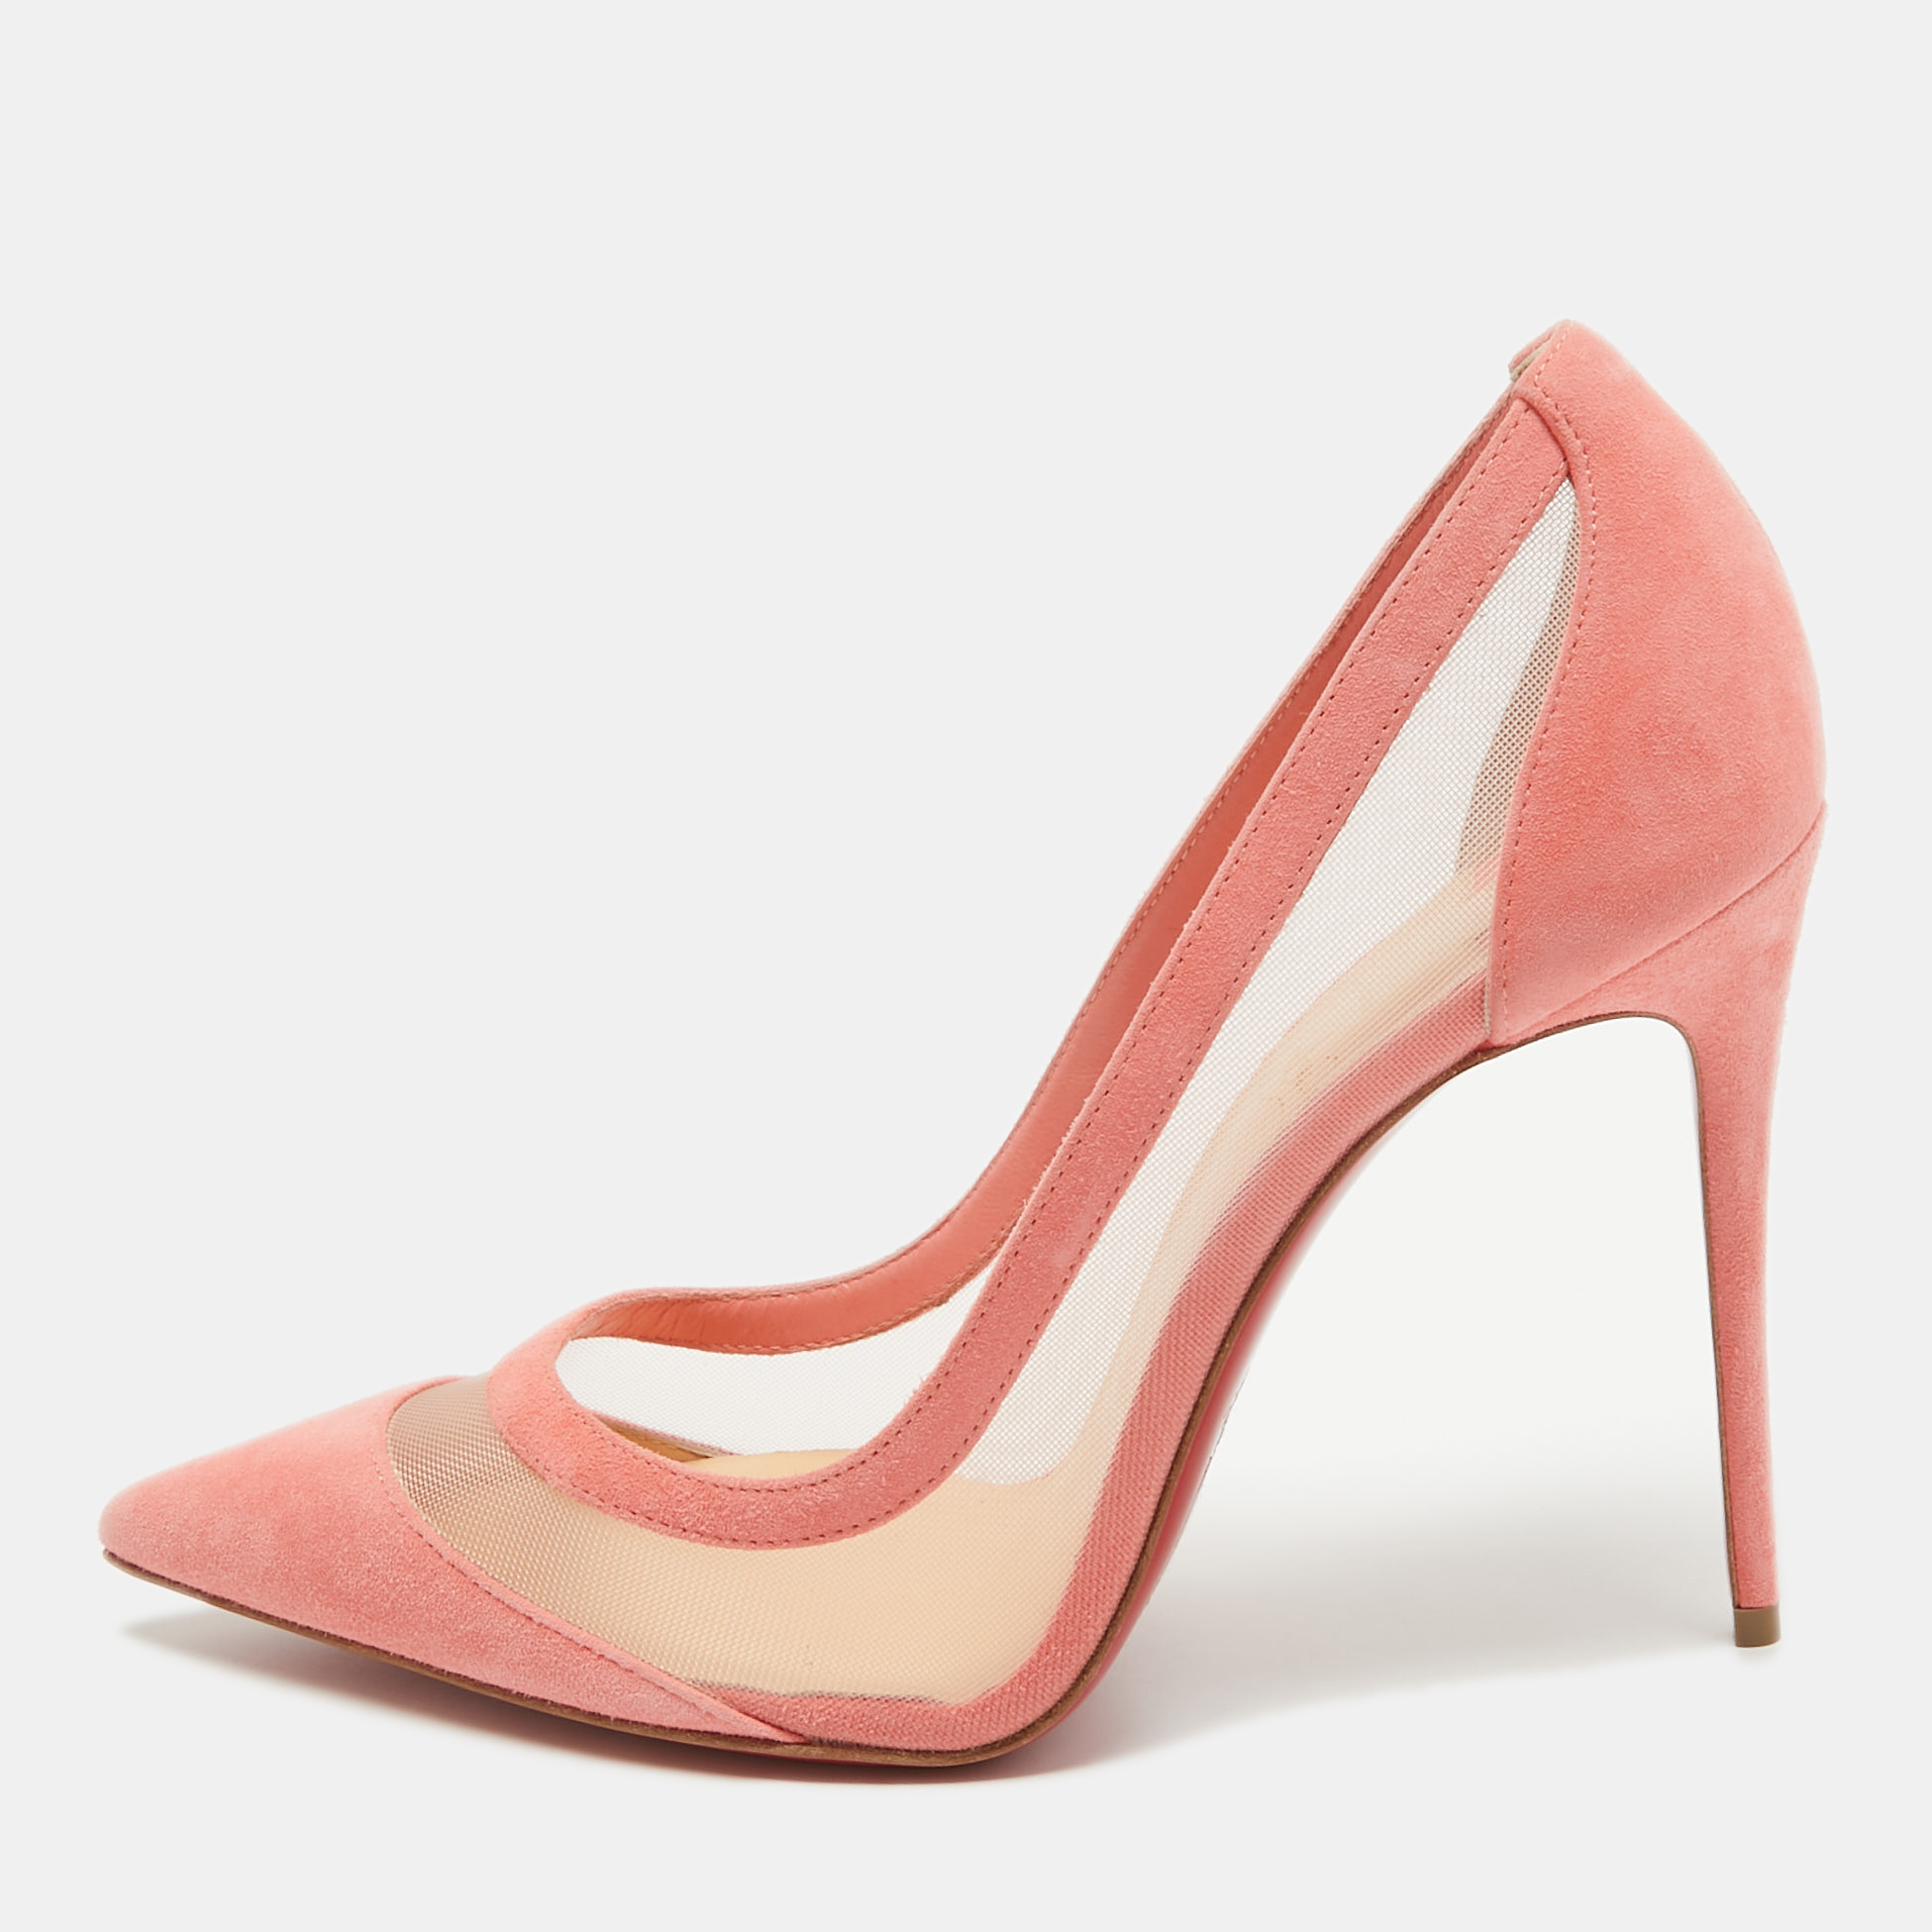 Christian louboutin pink suede and mesh galativi pumps size 38.5